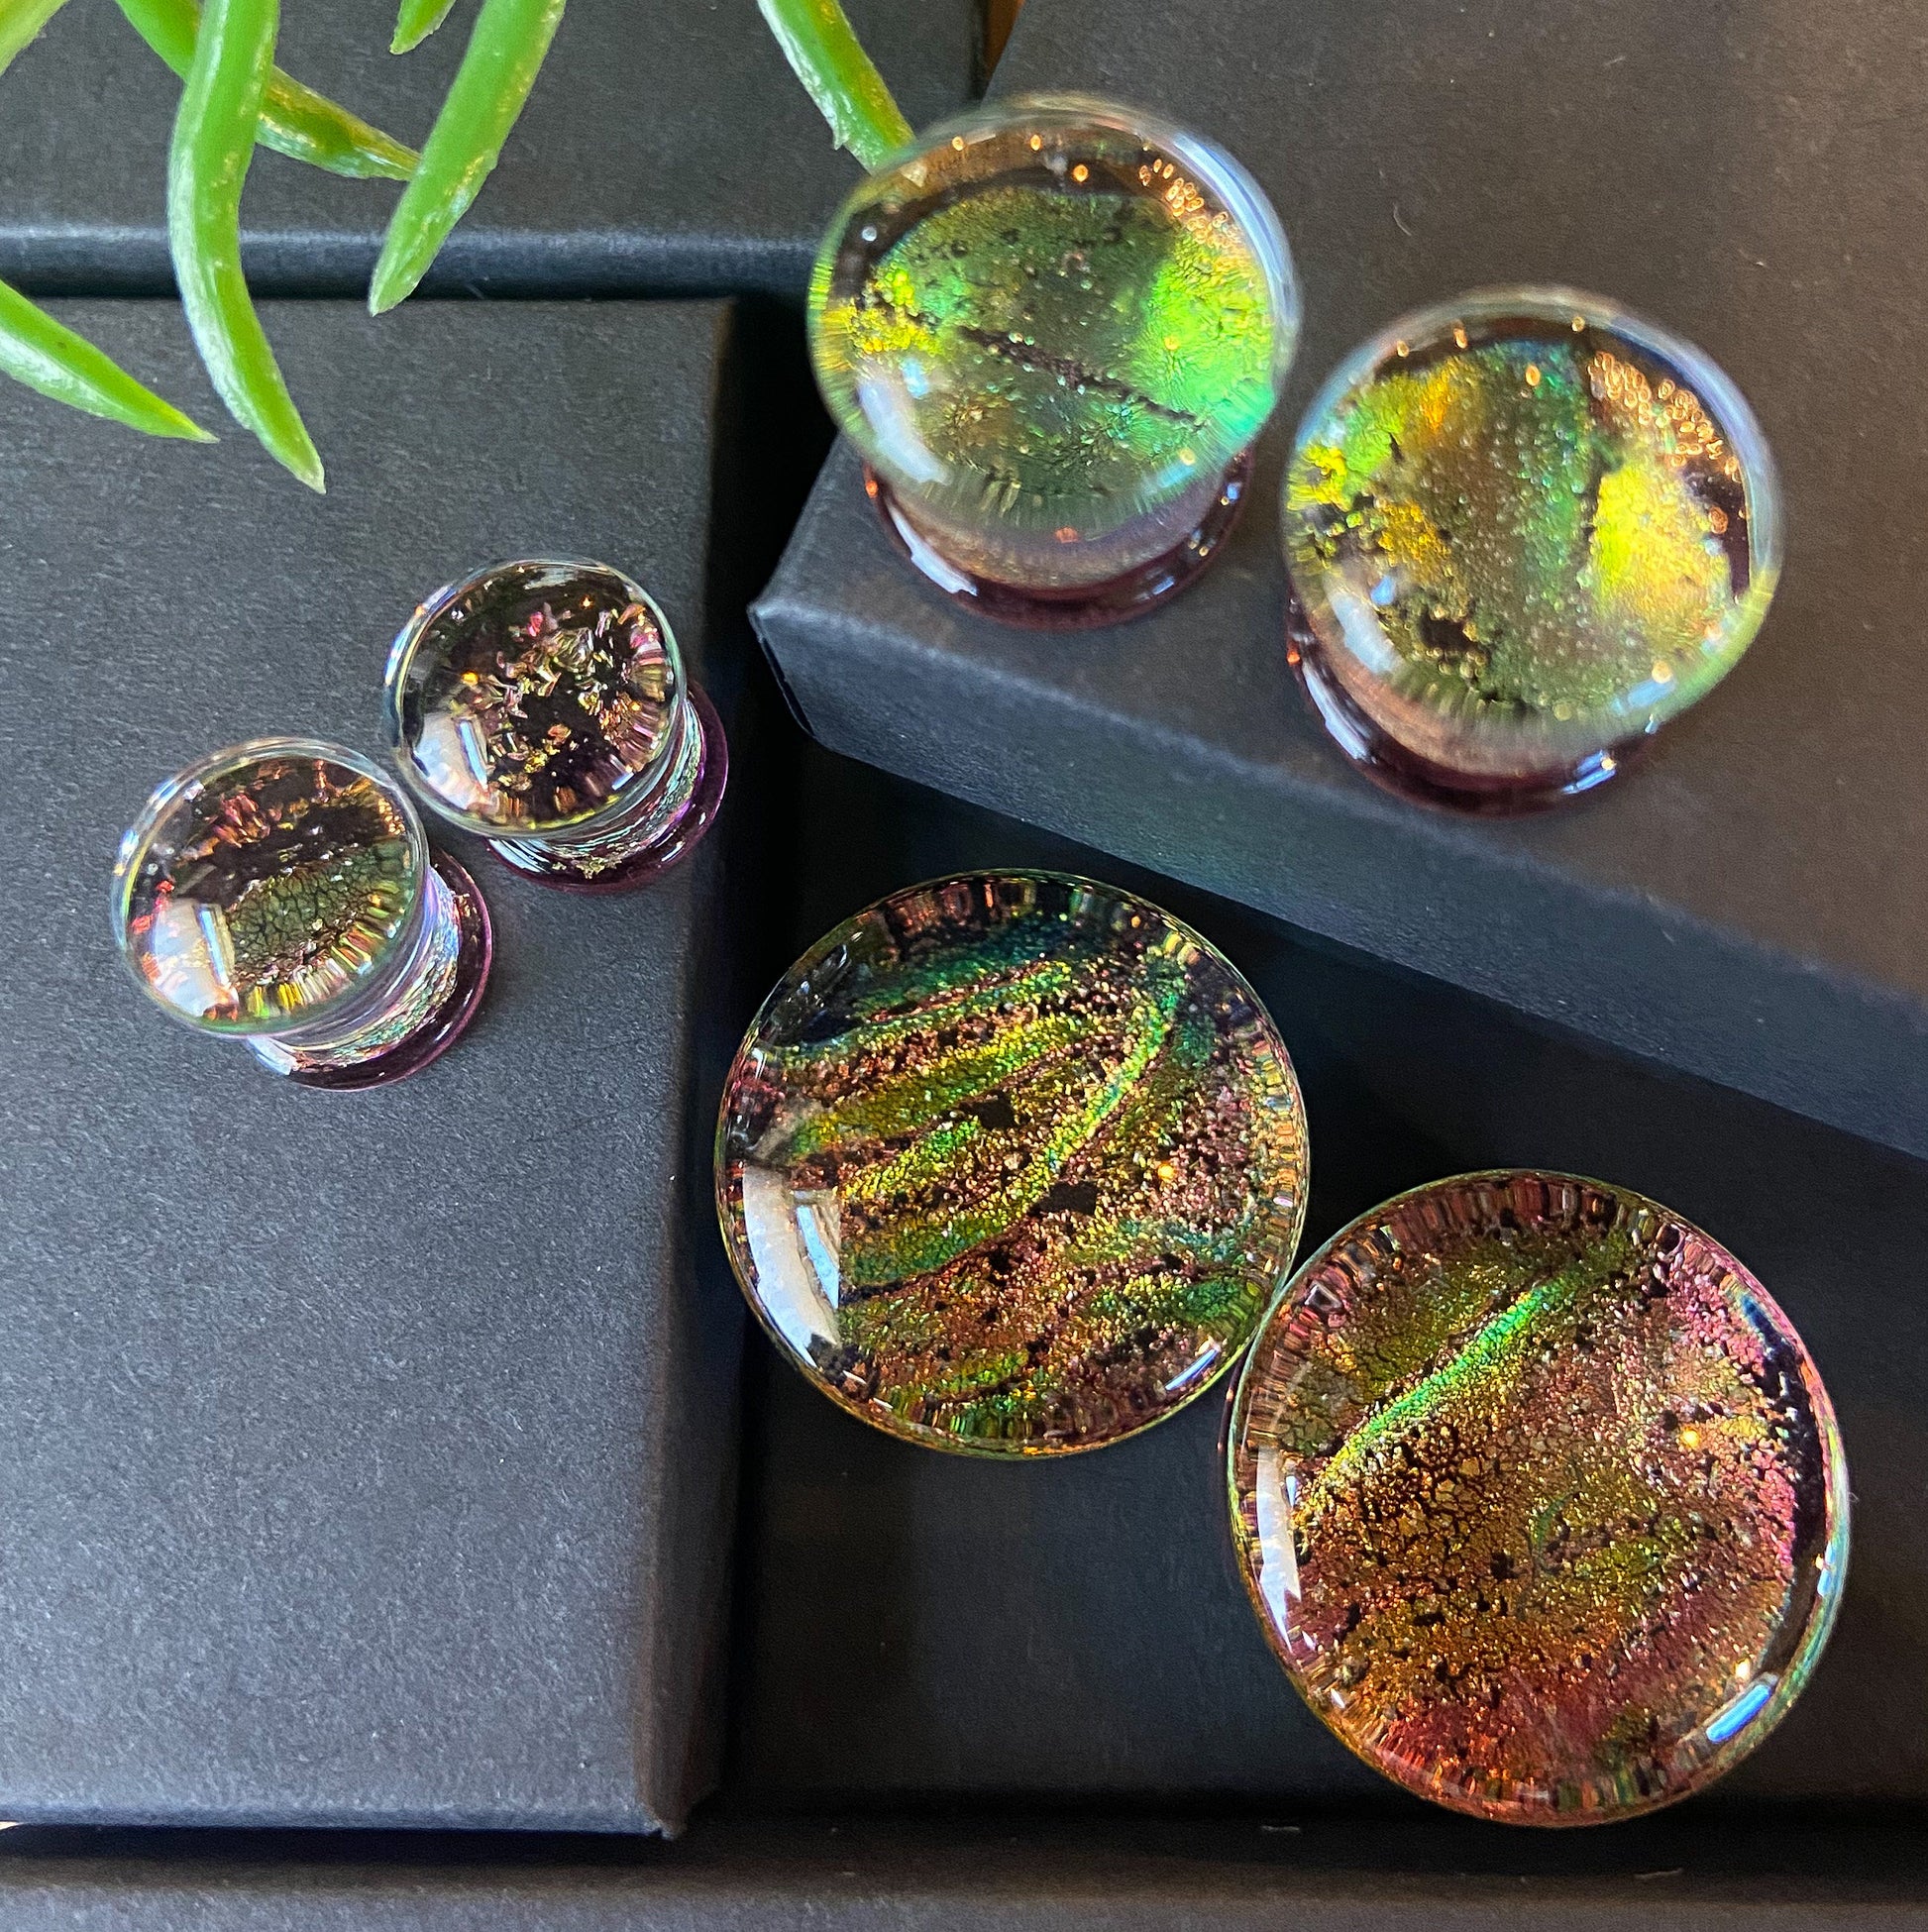 PAIR of Unique Purple Dichroic Glass Double Flare Plugs - Gauges 2g (6mm) through 3/4" (19mm) available!